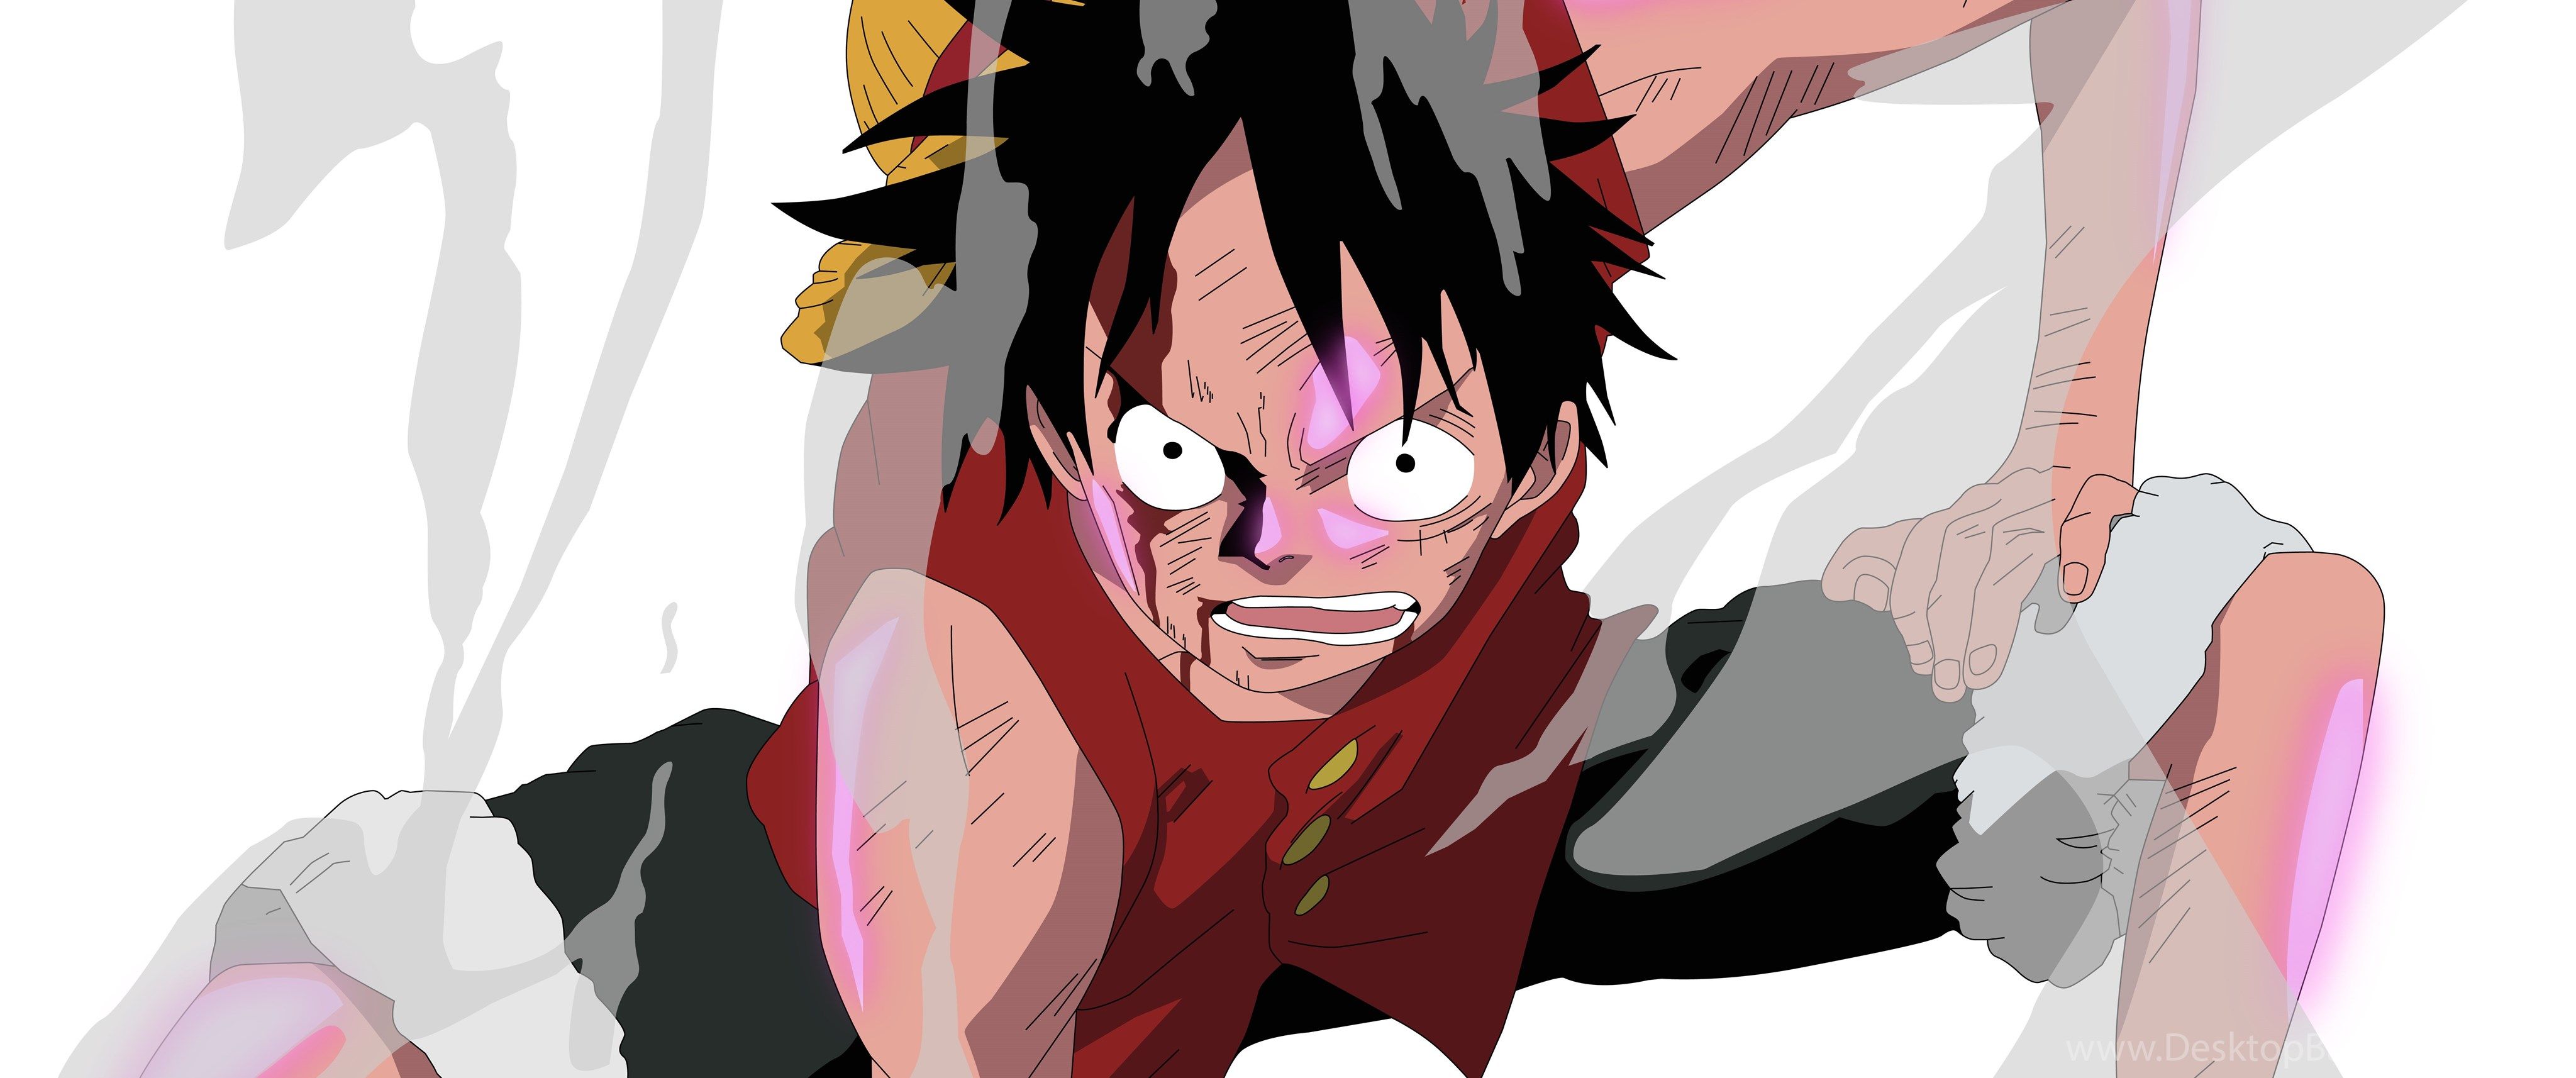 Anime Wallpaper: One Piece Luffy Wallpapers Phone HD Backgrounds ... Desktop Backgrounds